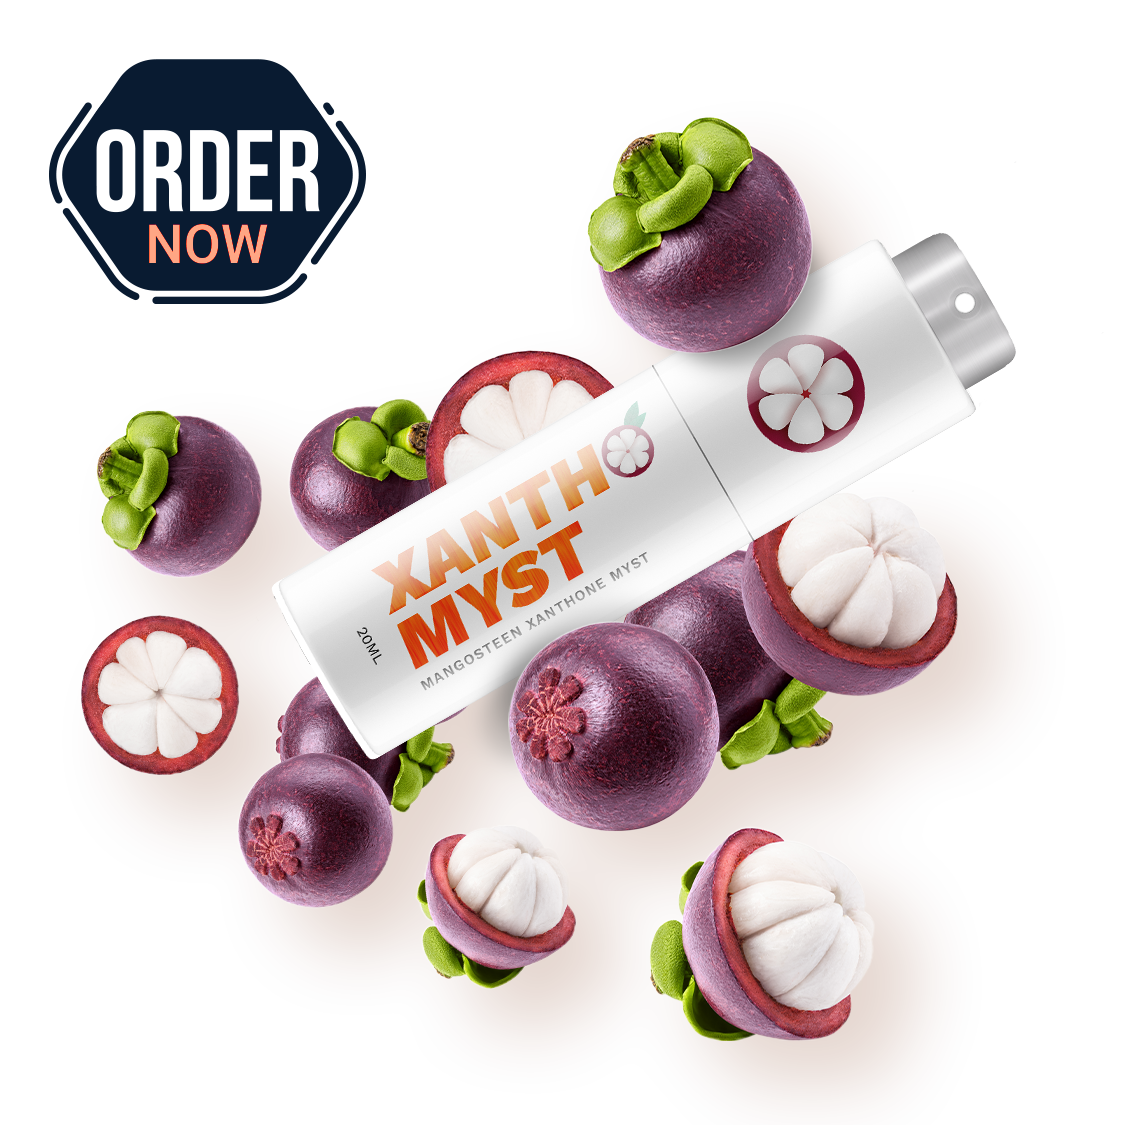 Mangosteen based product called Xanthomyst Anaheim CA